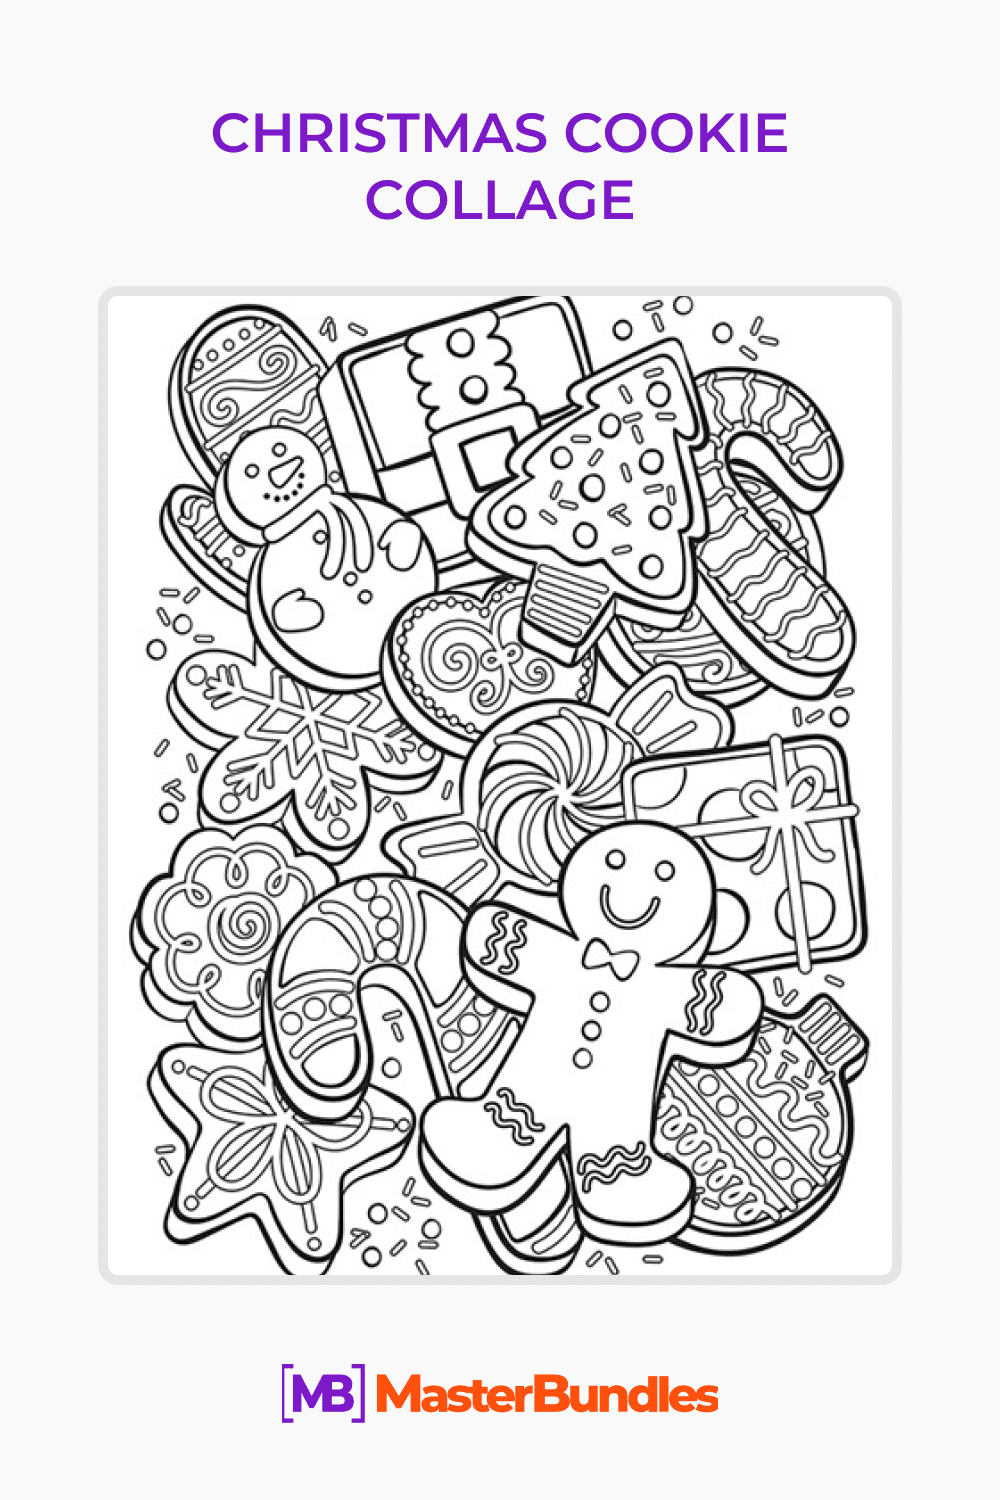 Christmas cookies free coloring page â